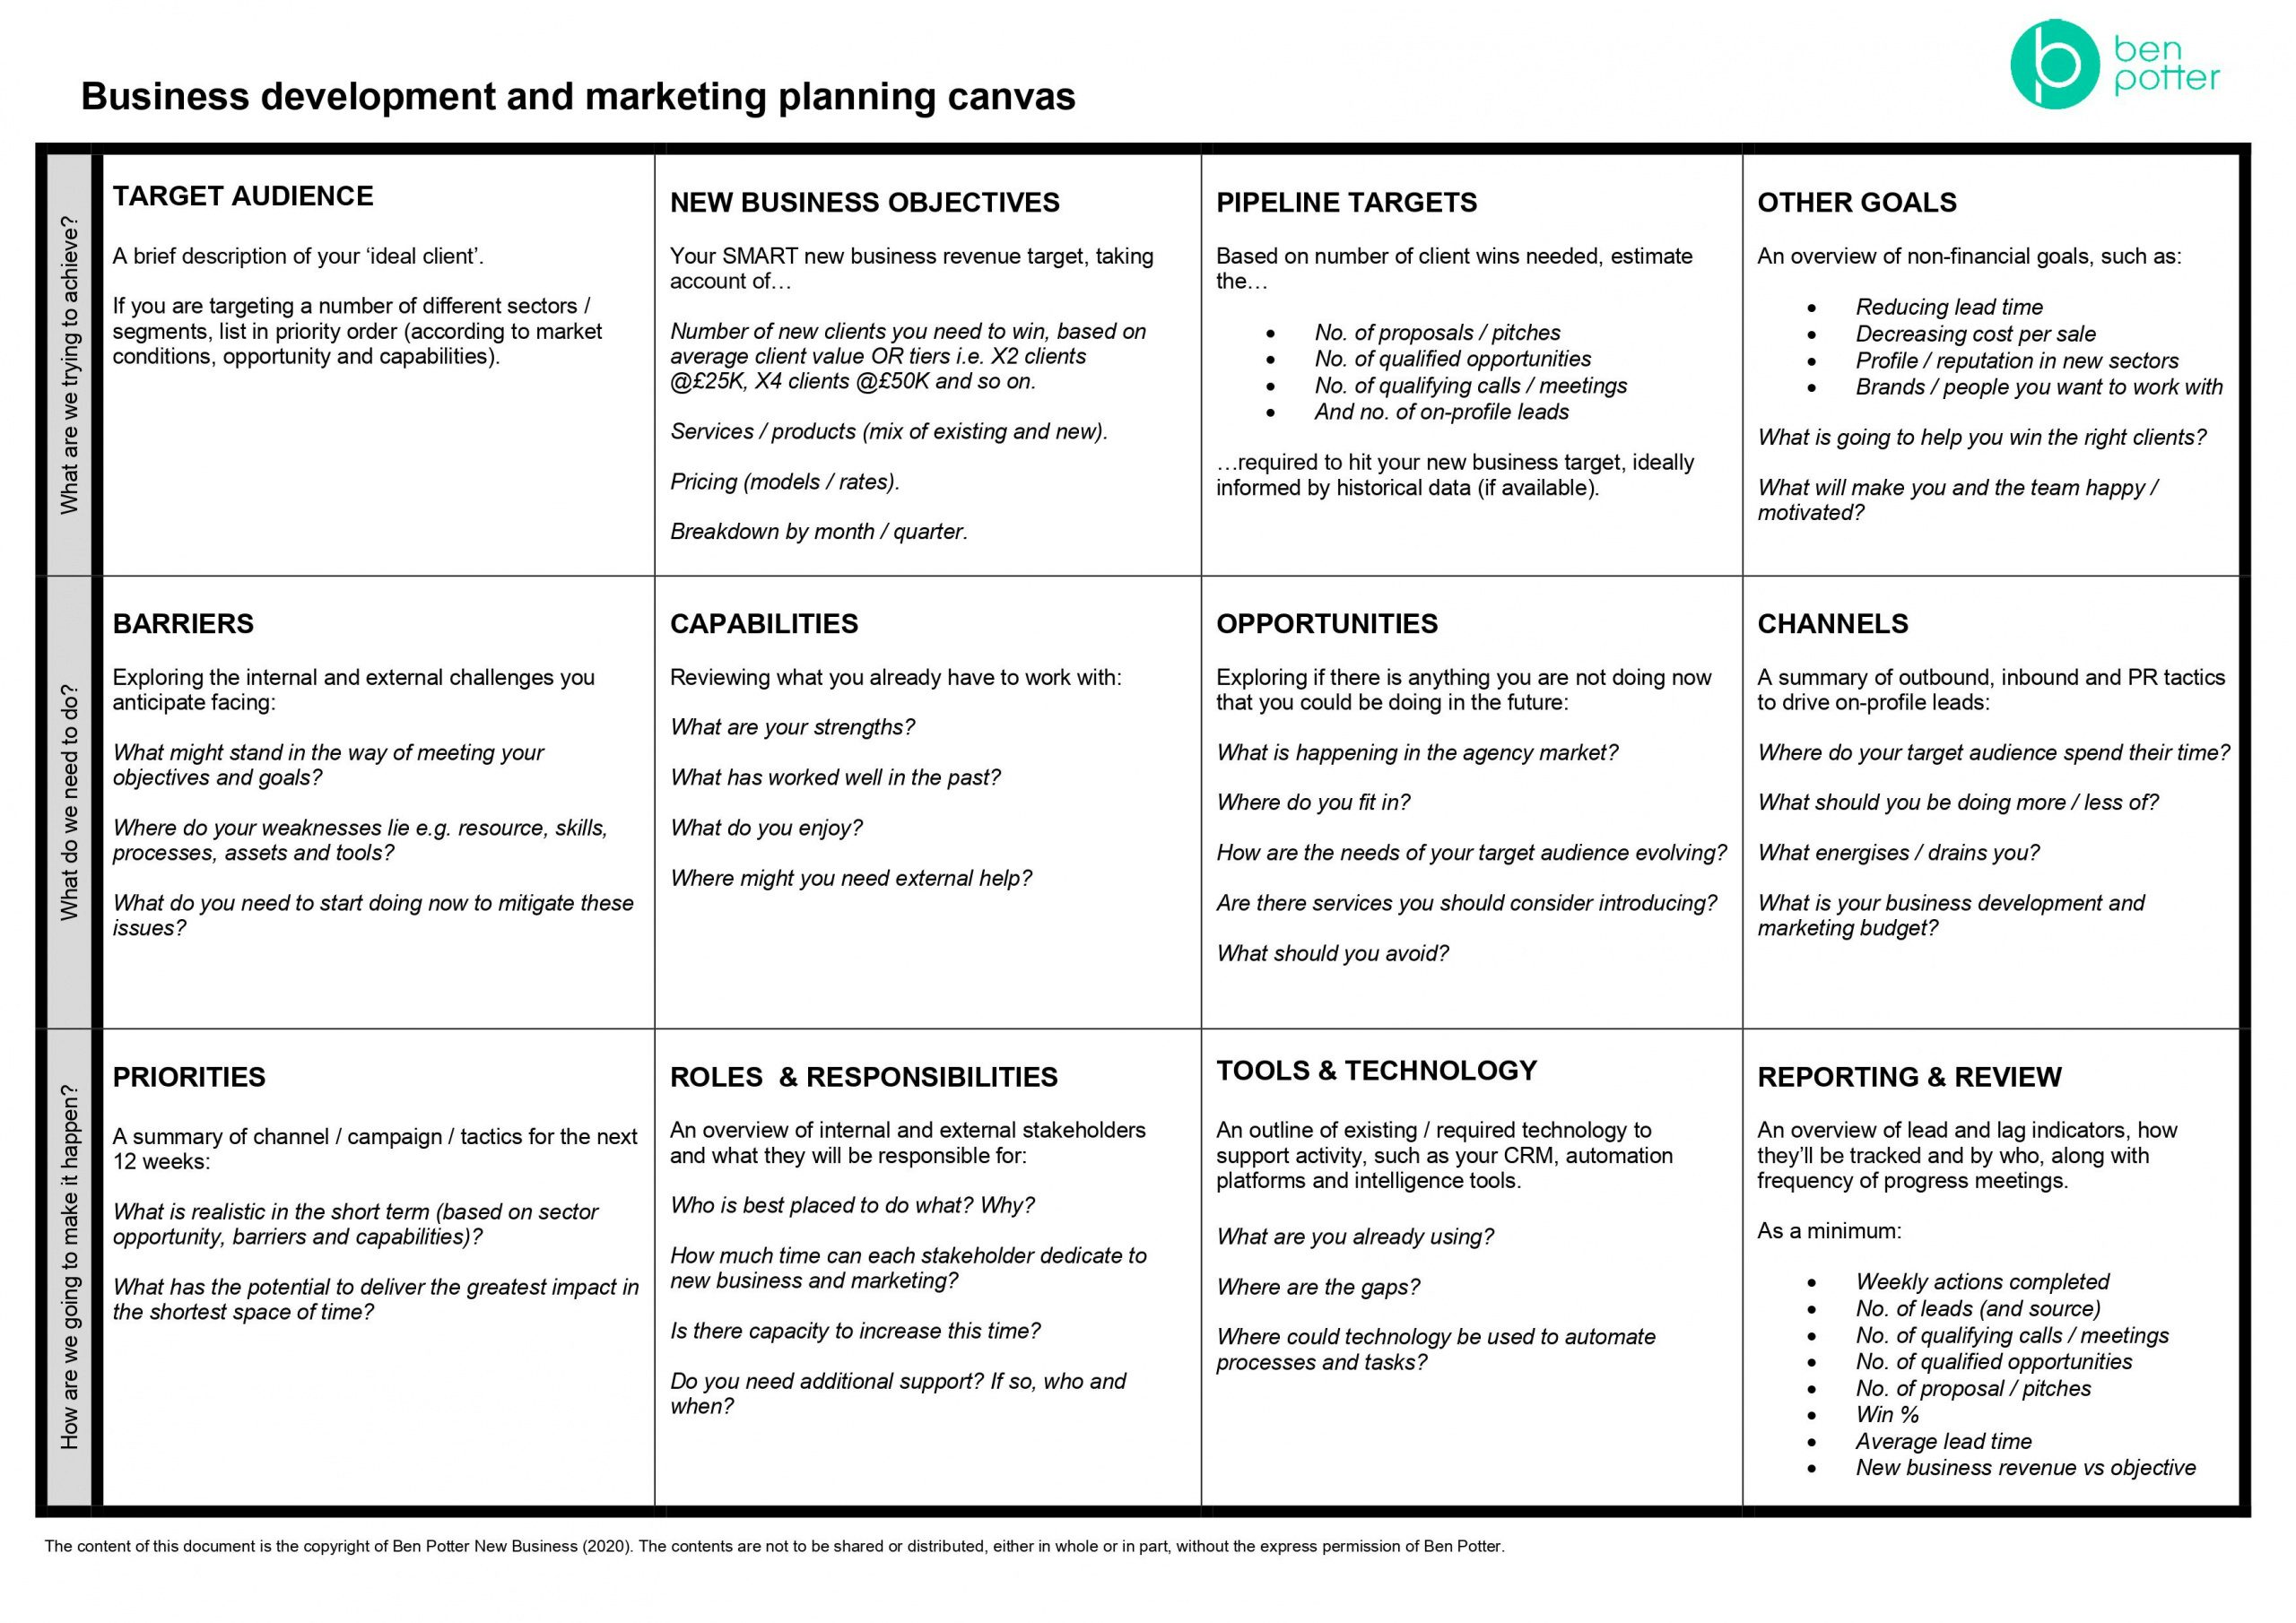 biz dev and marketing canvas including target audience, new biz objectives, pipeline targets, other goals, barriers, capabilities, opportunities, channels, priorities, roles and responsibilities, tools and technologies, reporting and review